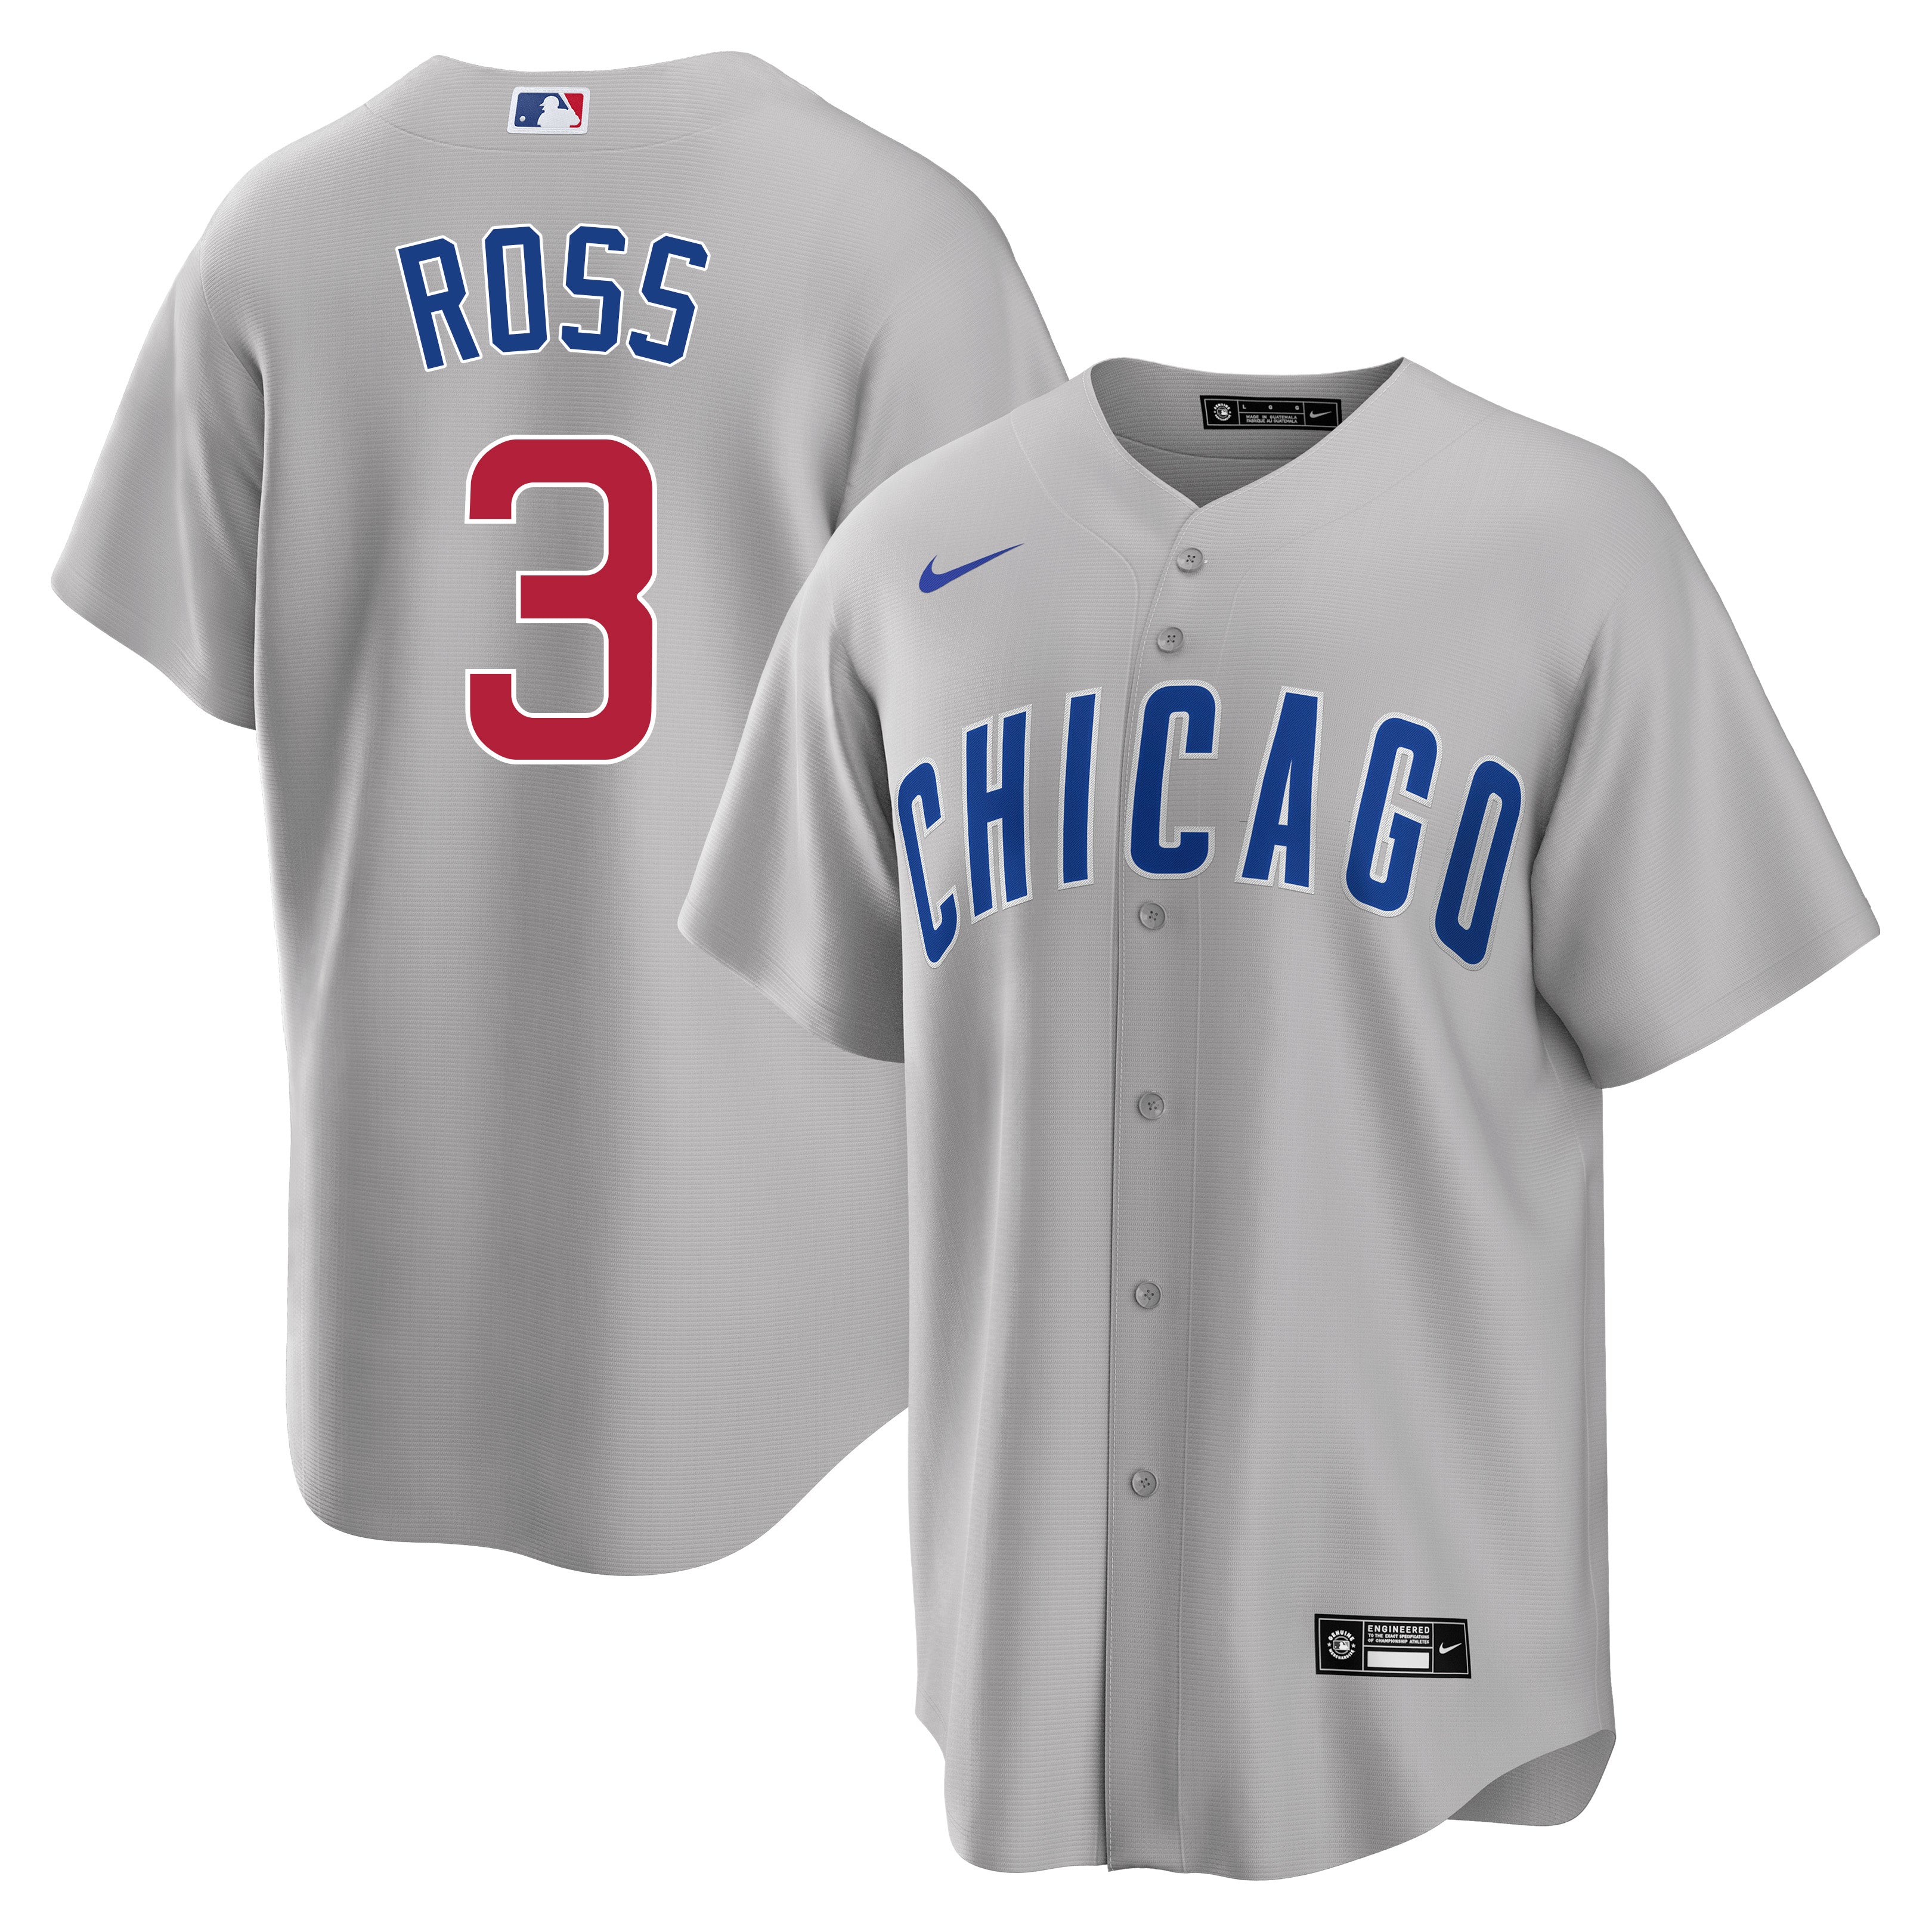 David Ross Chicago Cubs Jersey Number Kit, Authentic Home Jersey